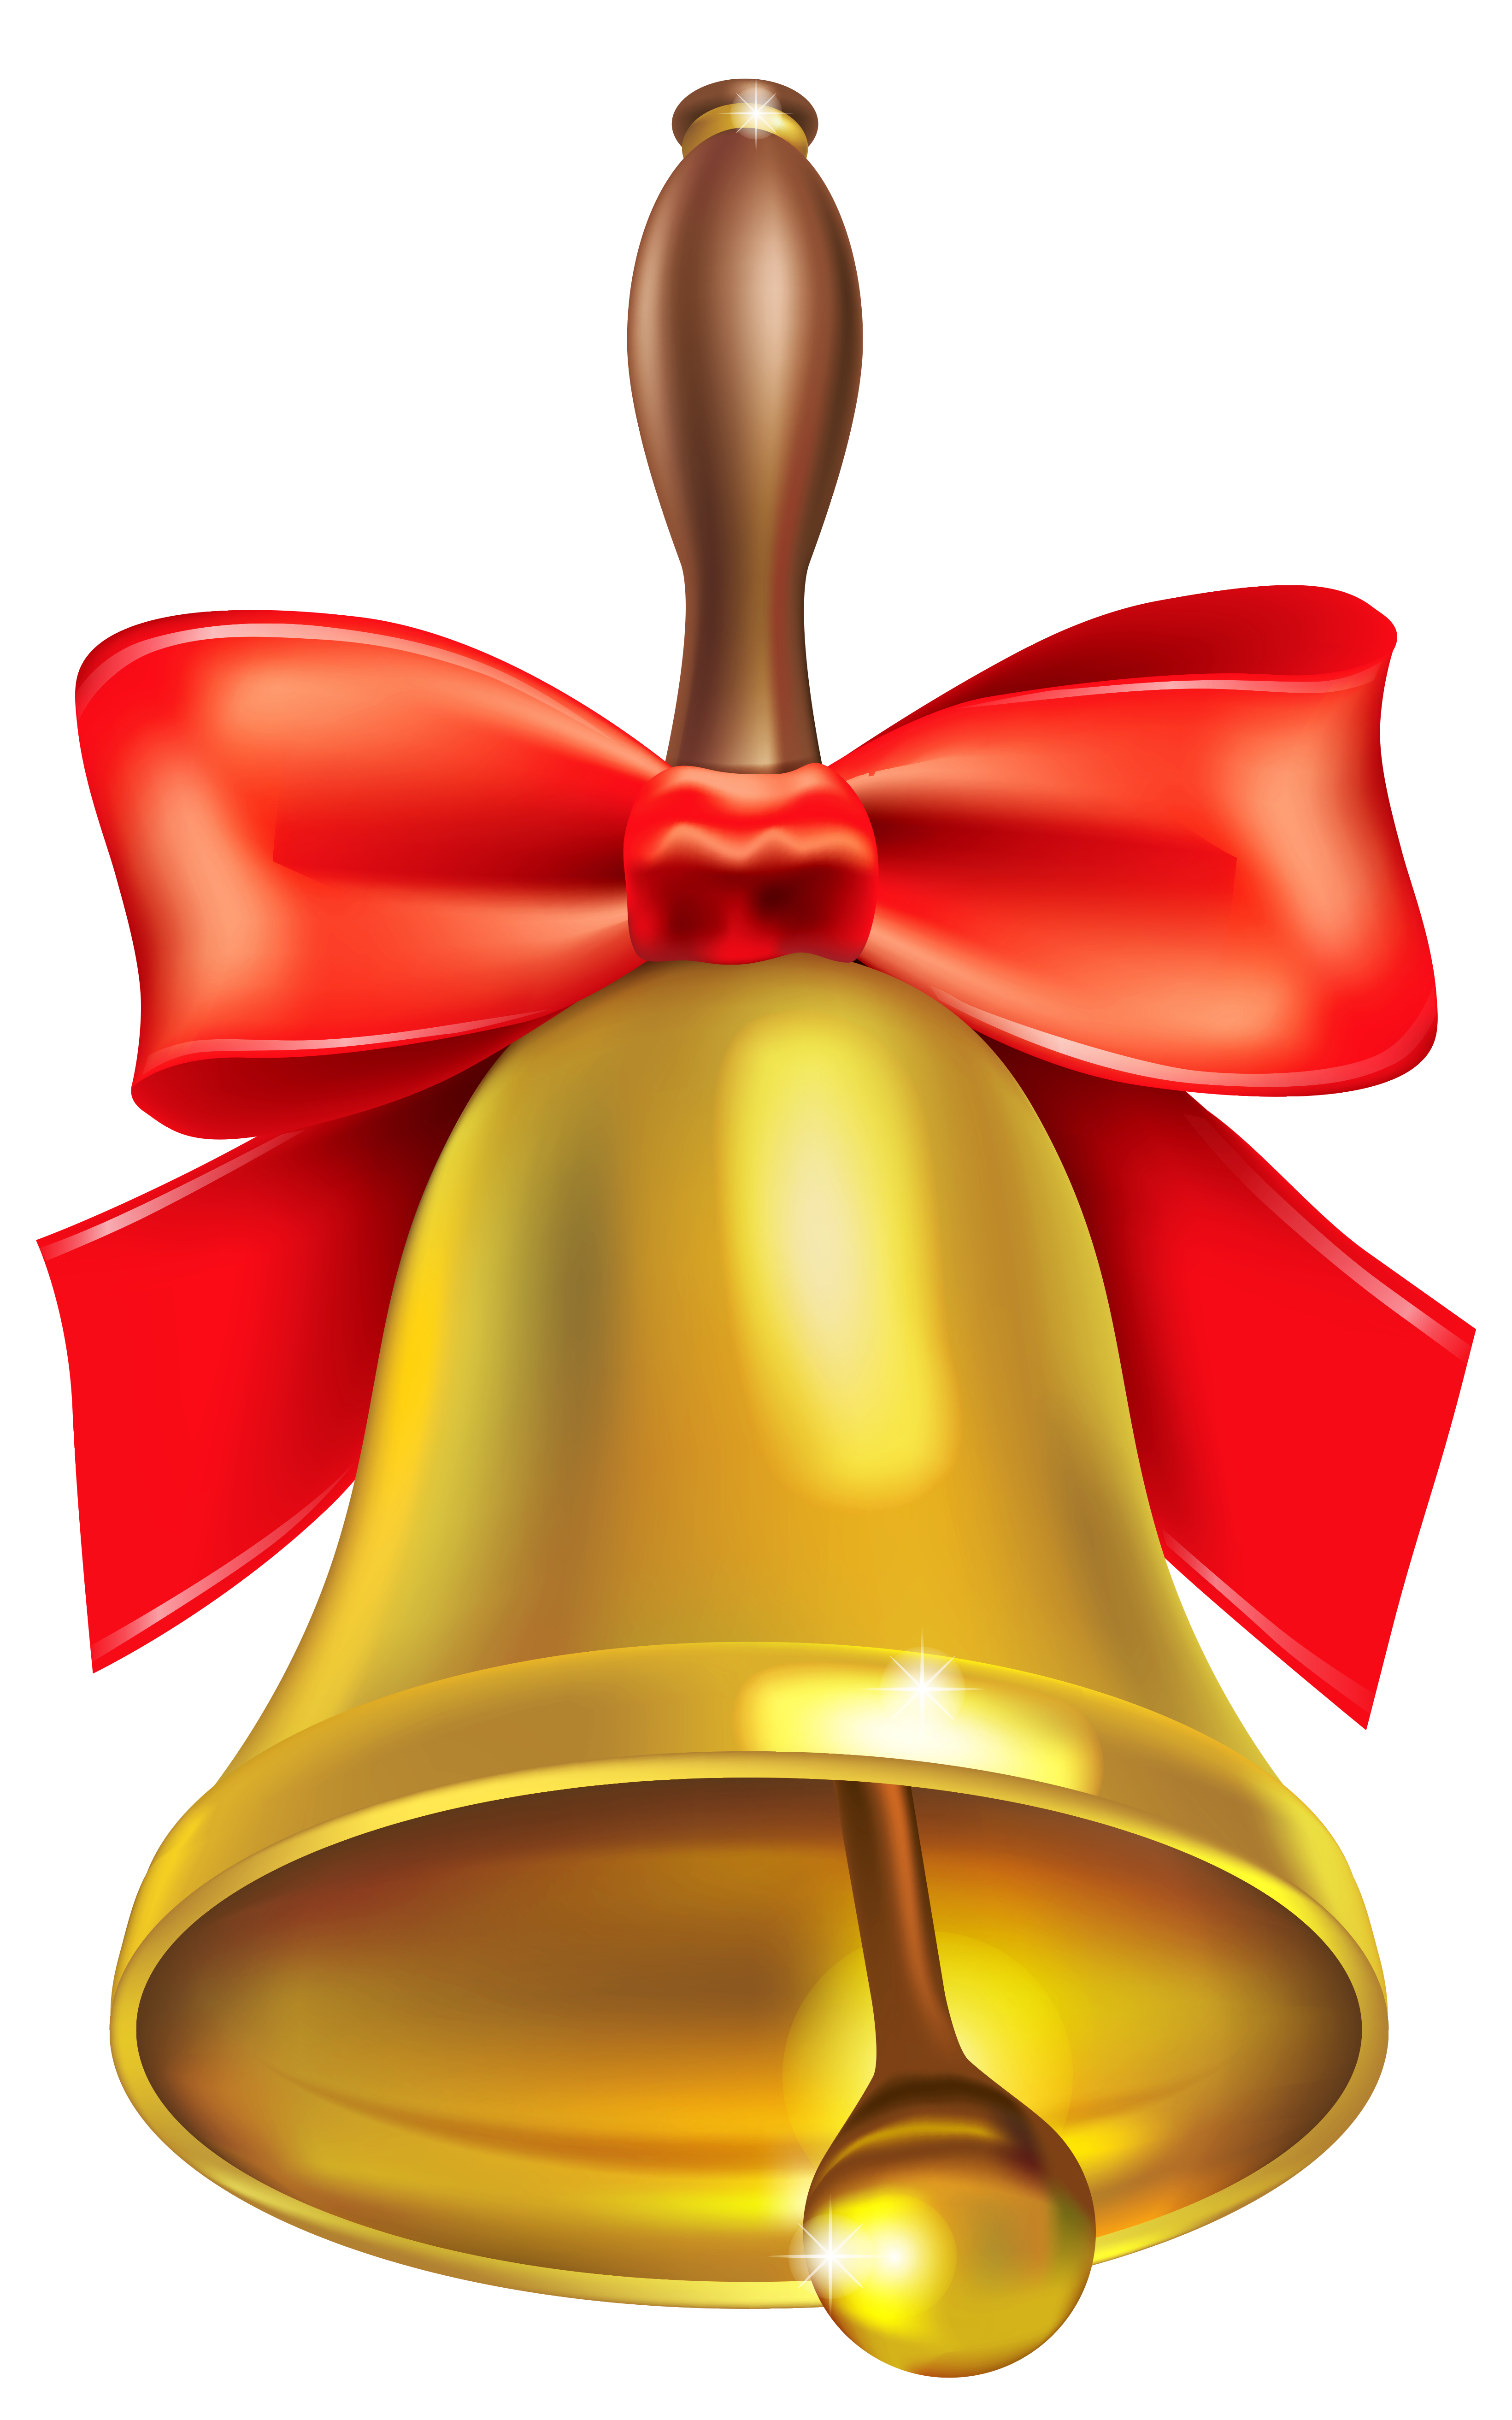 Gold School Bell PNG Clipart Picture.